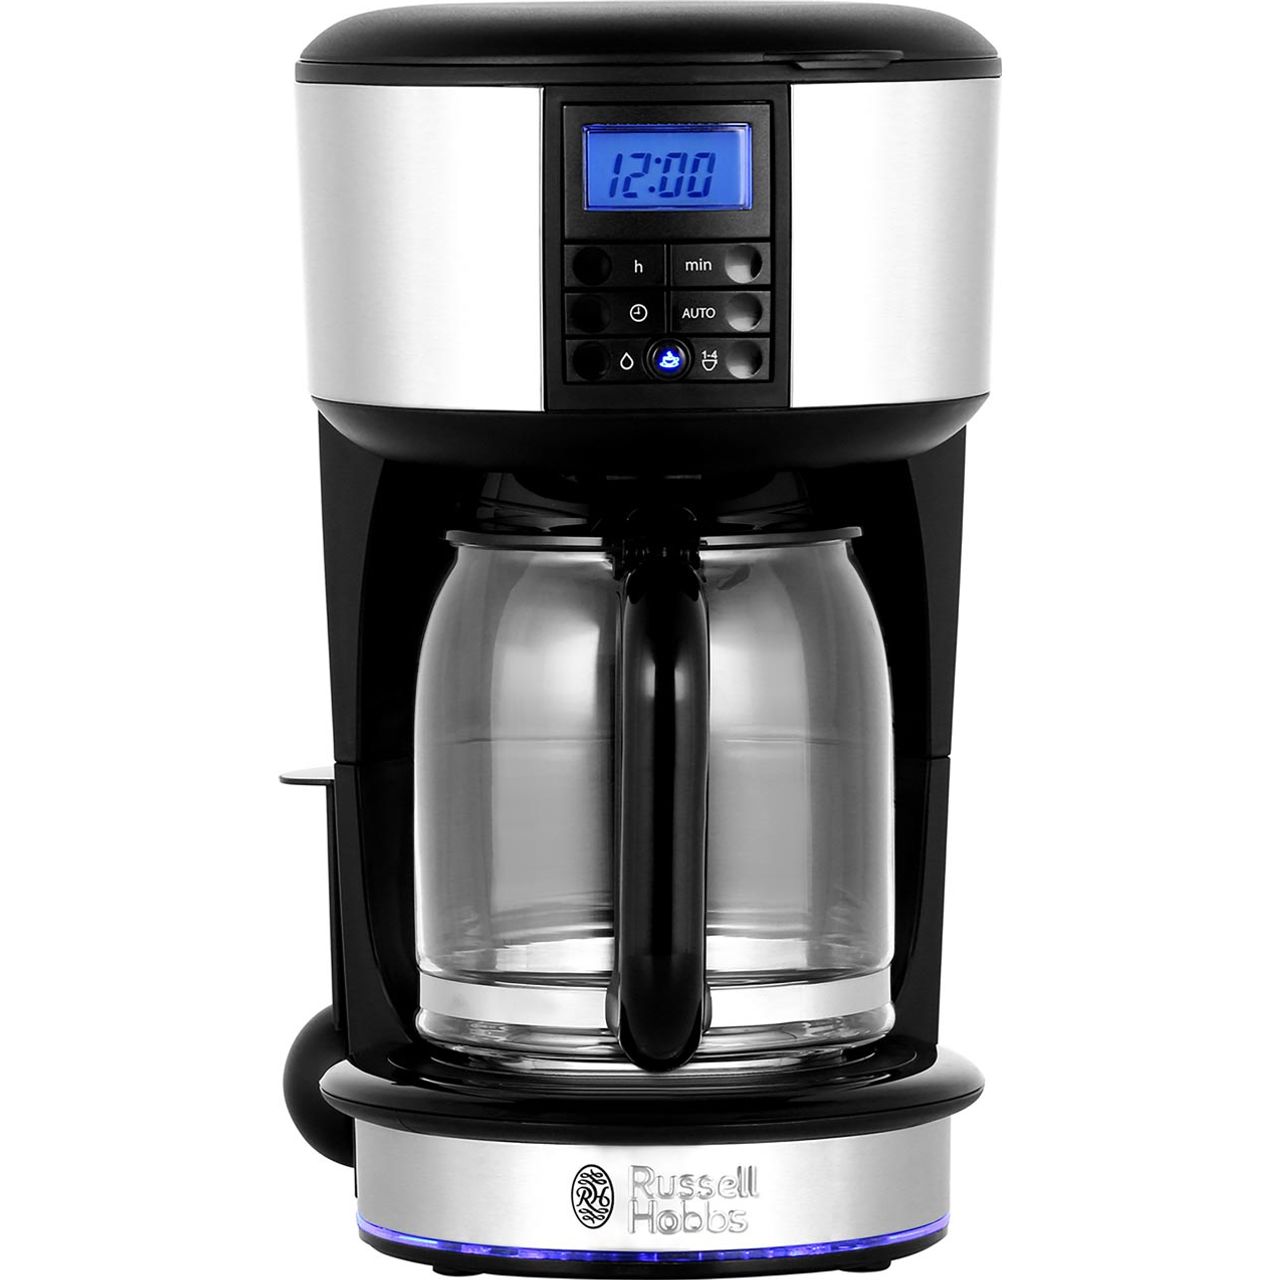 Russell Hobbs Cafe Barista One Review 